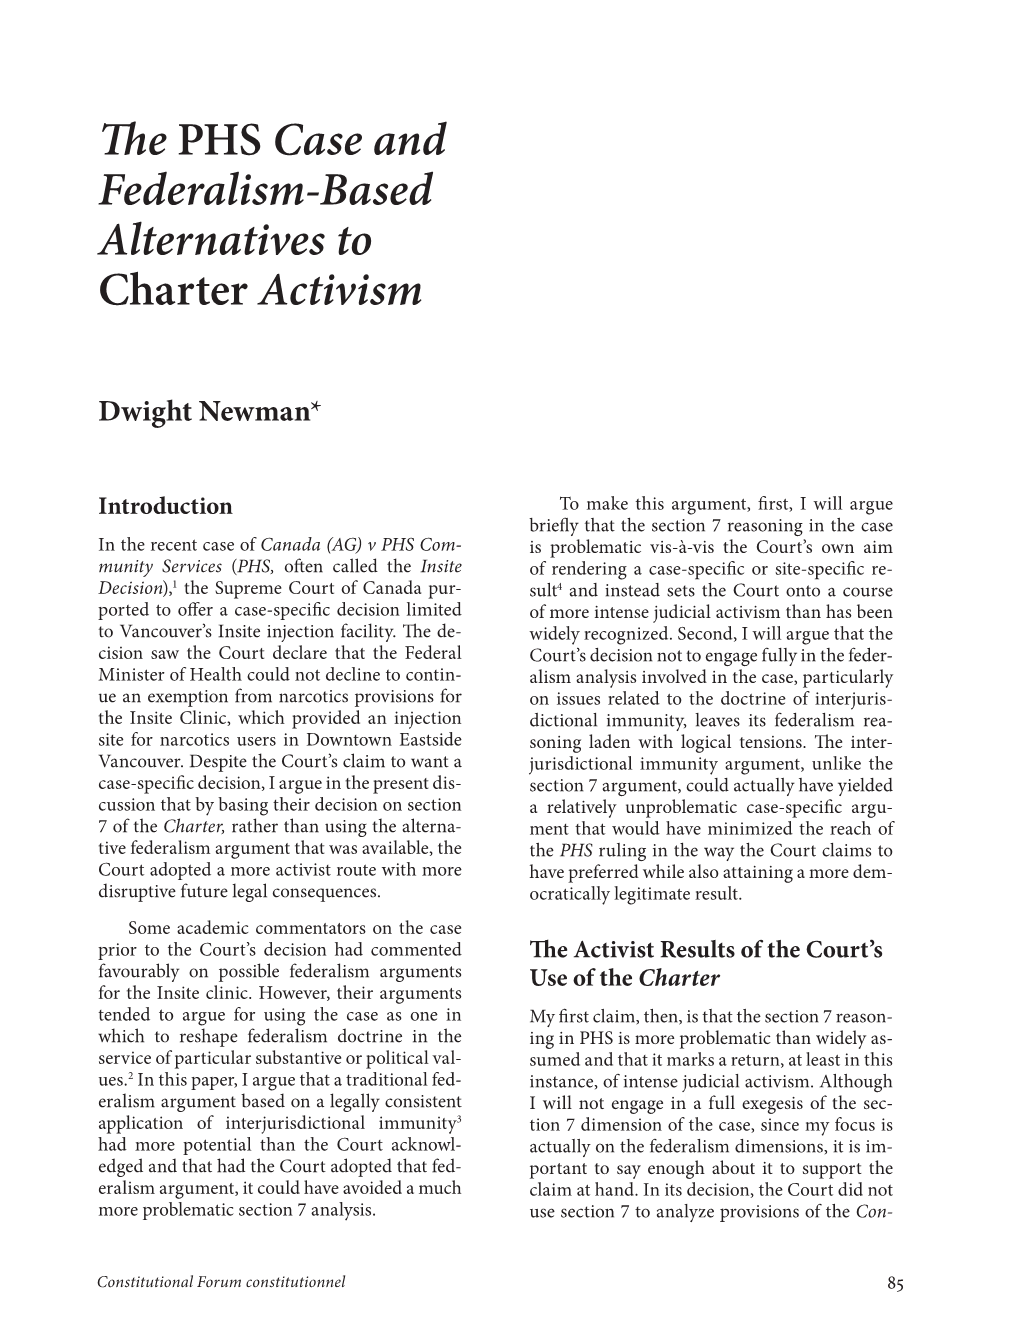 The PHS Case and Federalism-Based Alternatives To